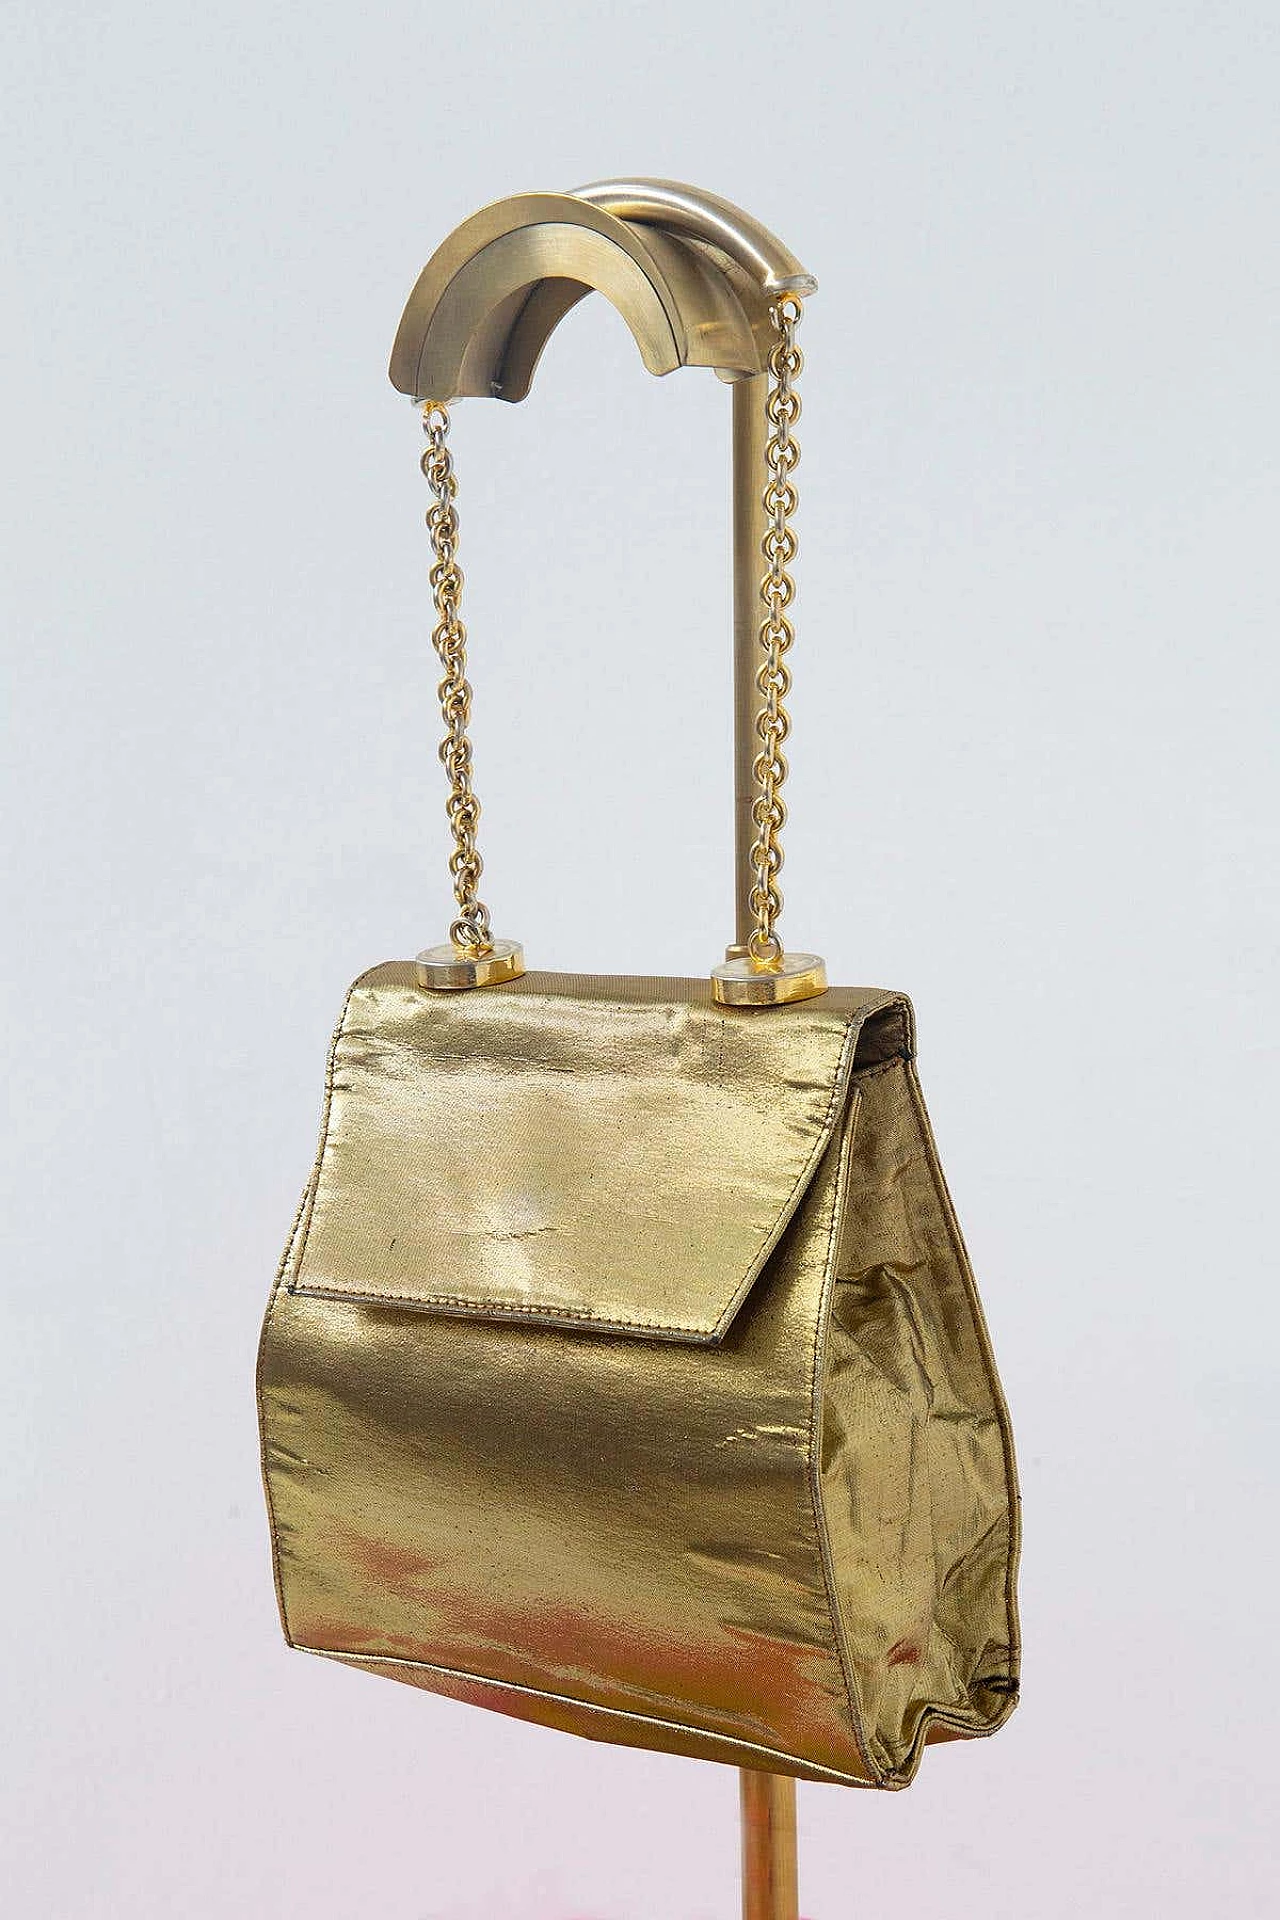 Gold-coloured evening shoulder bag by Gianni Versace, 1990s 3